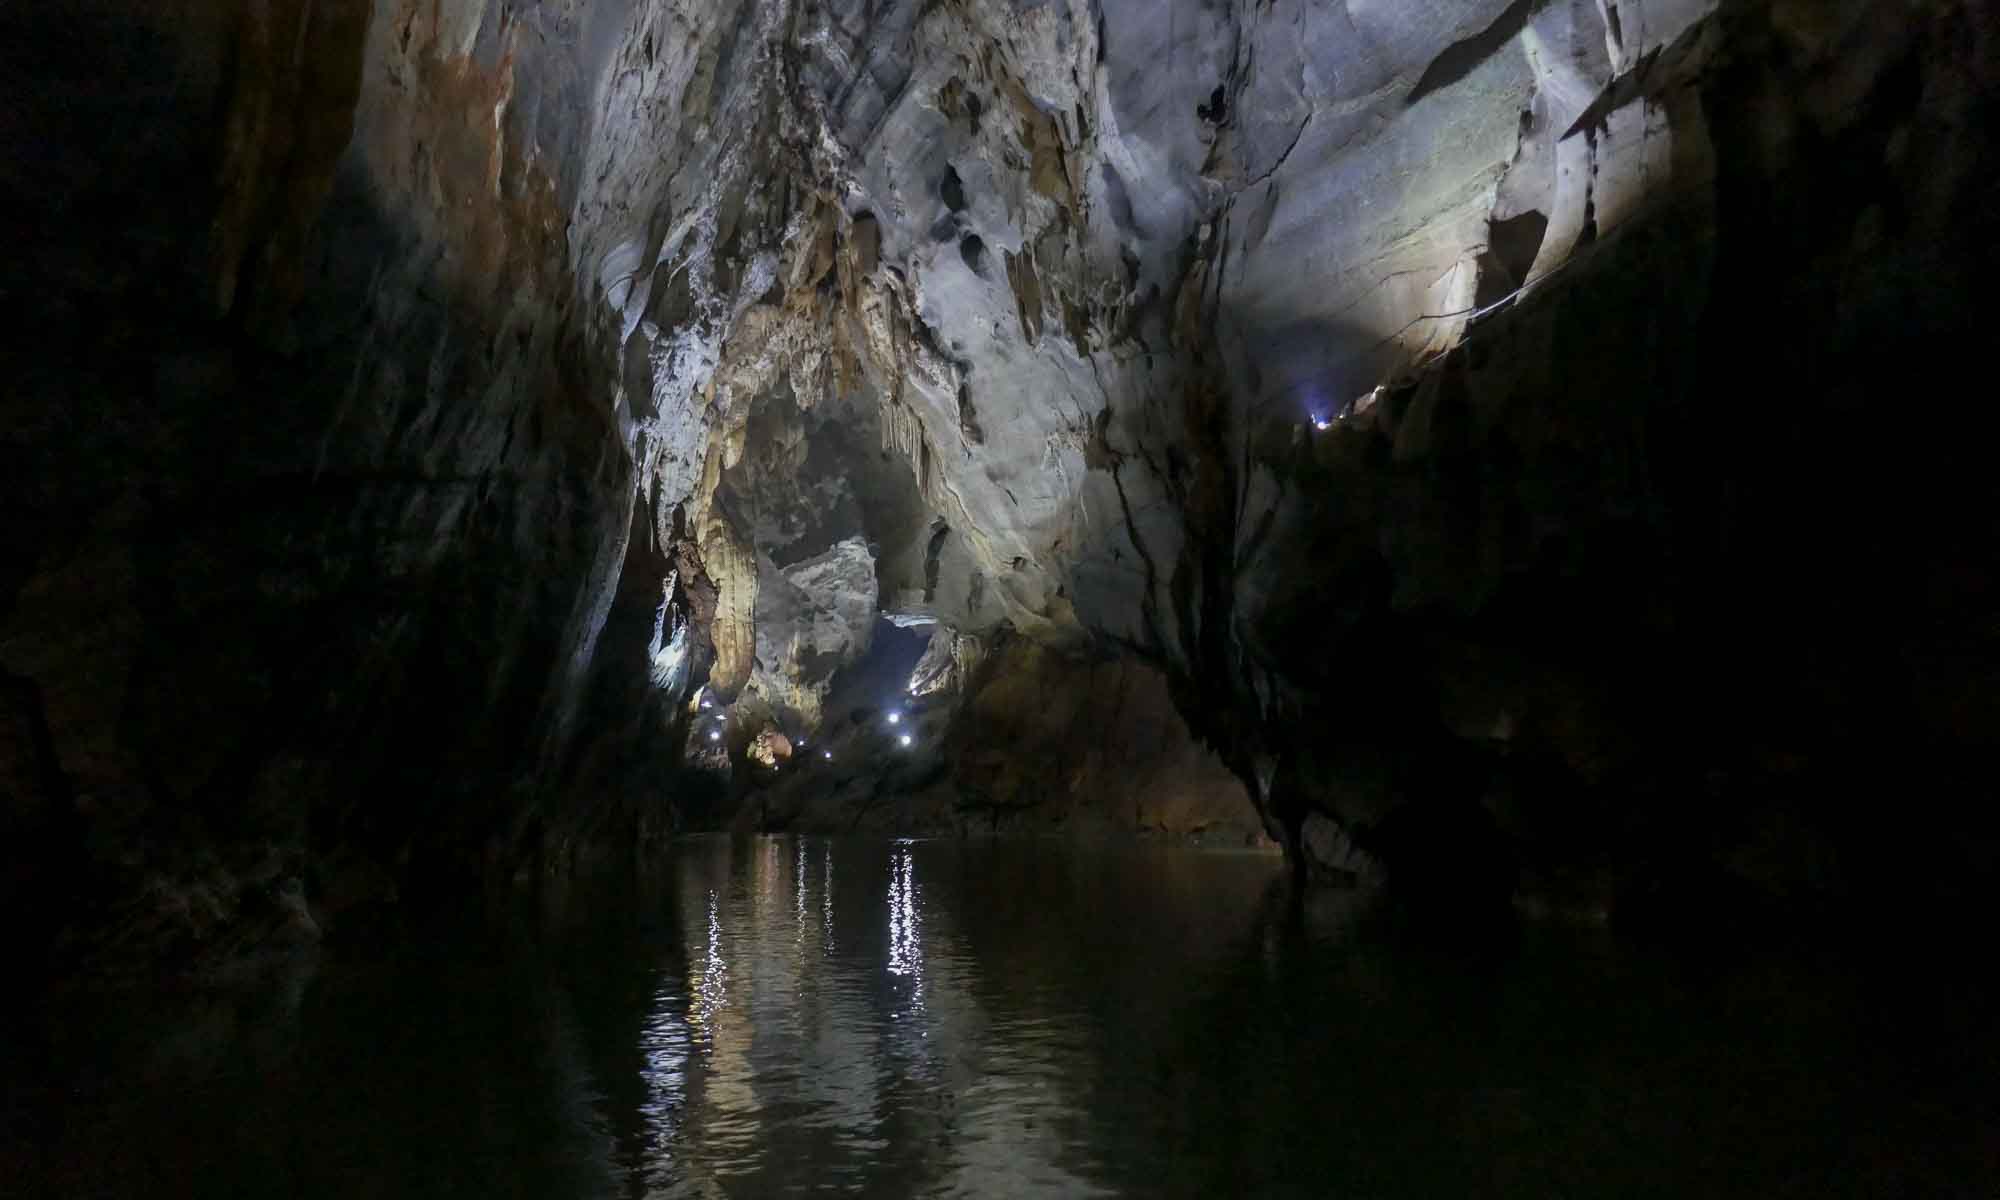 Boat ride in the cave